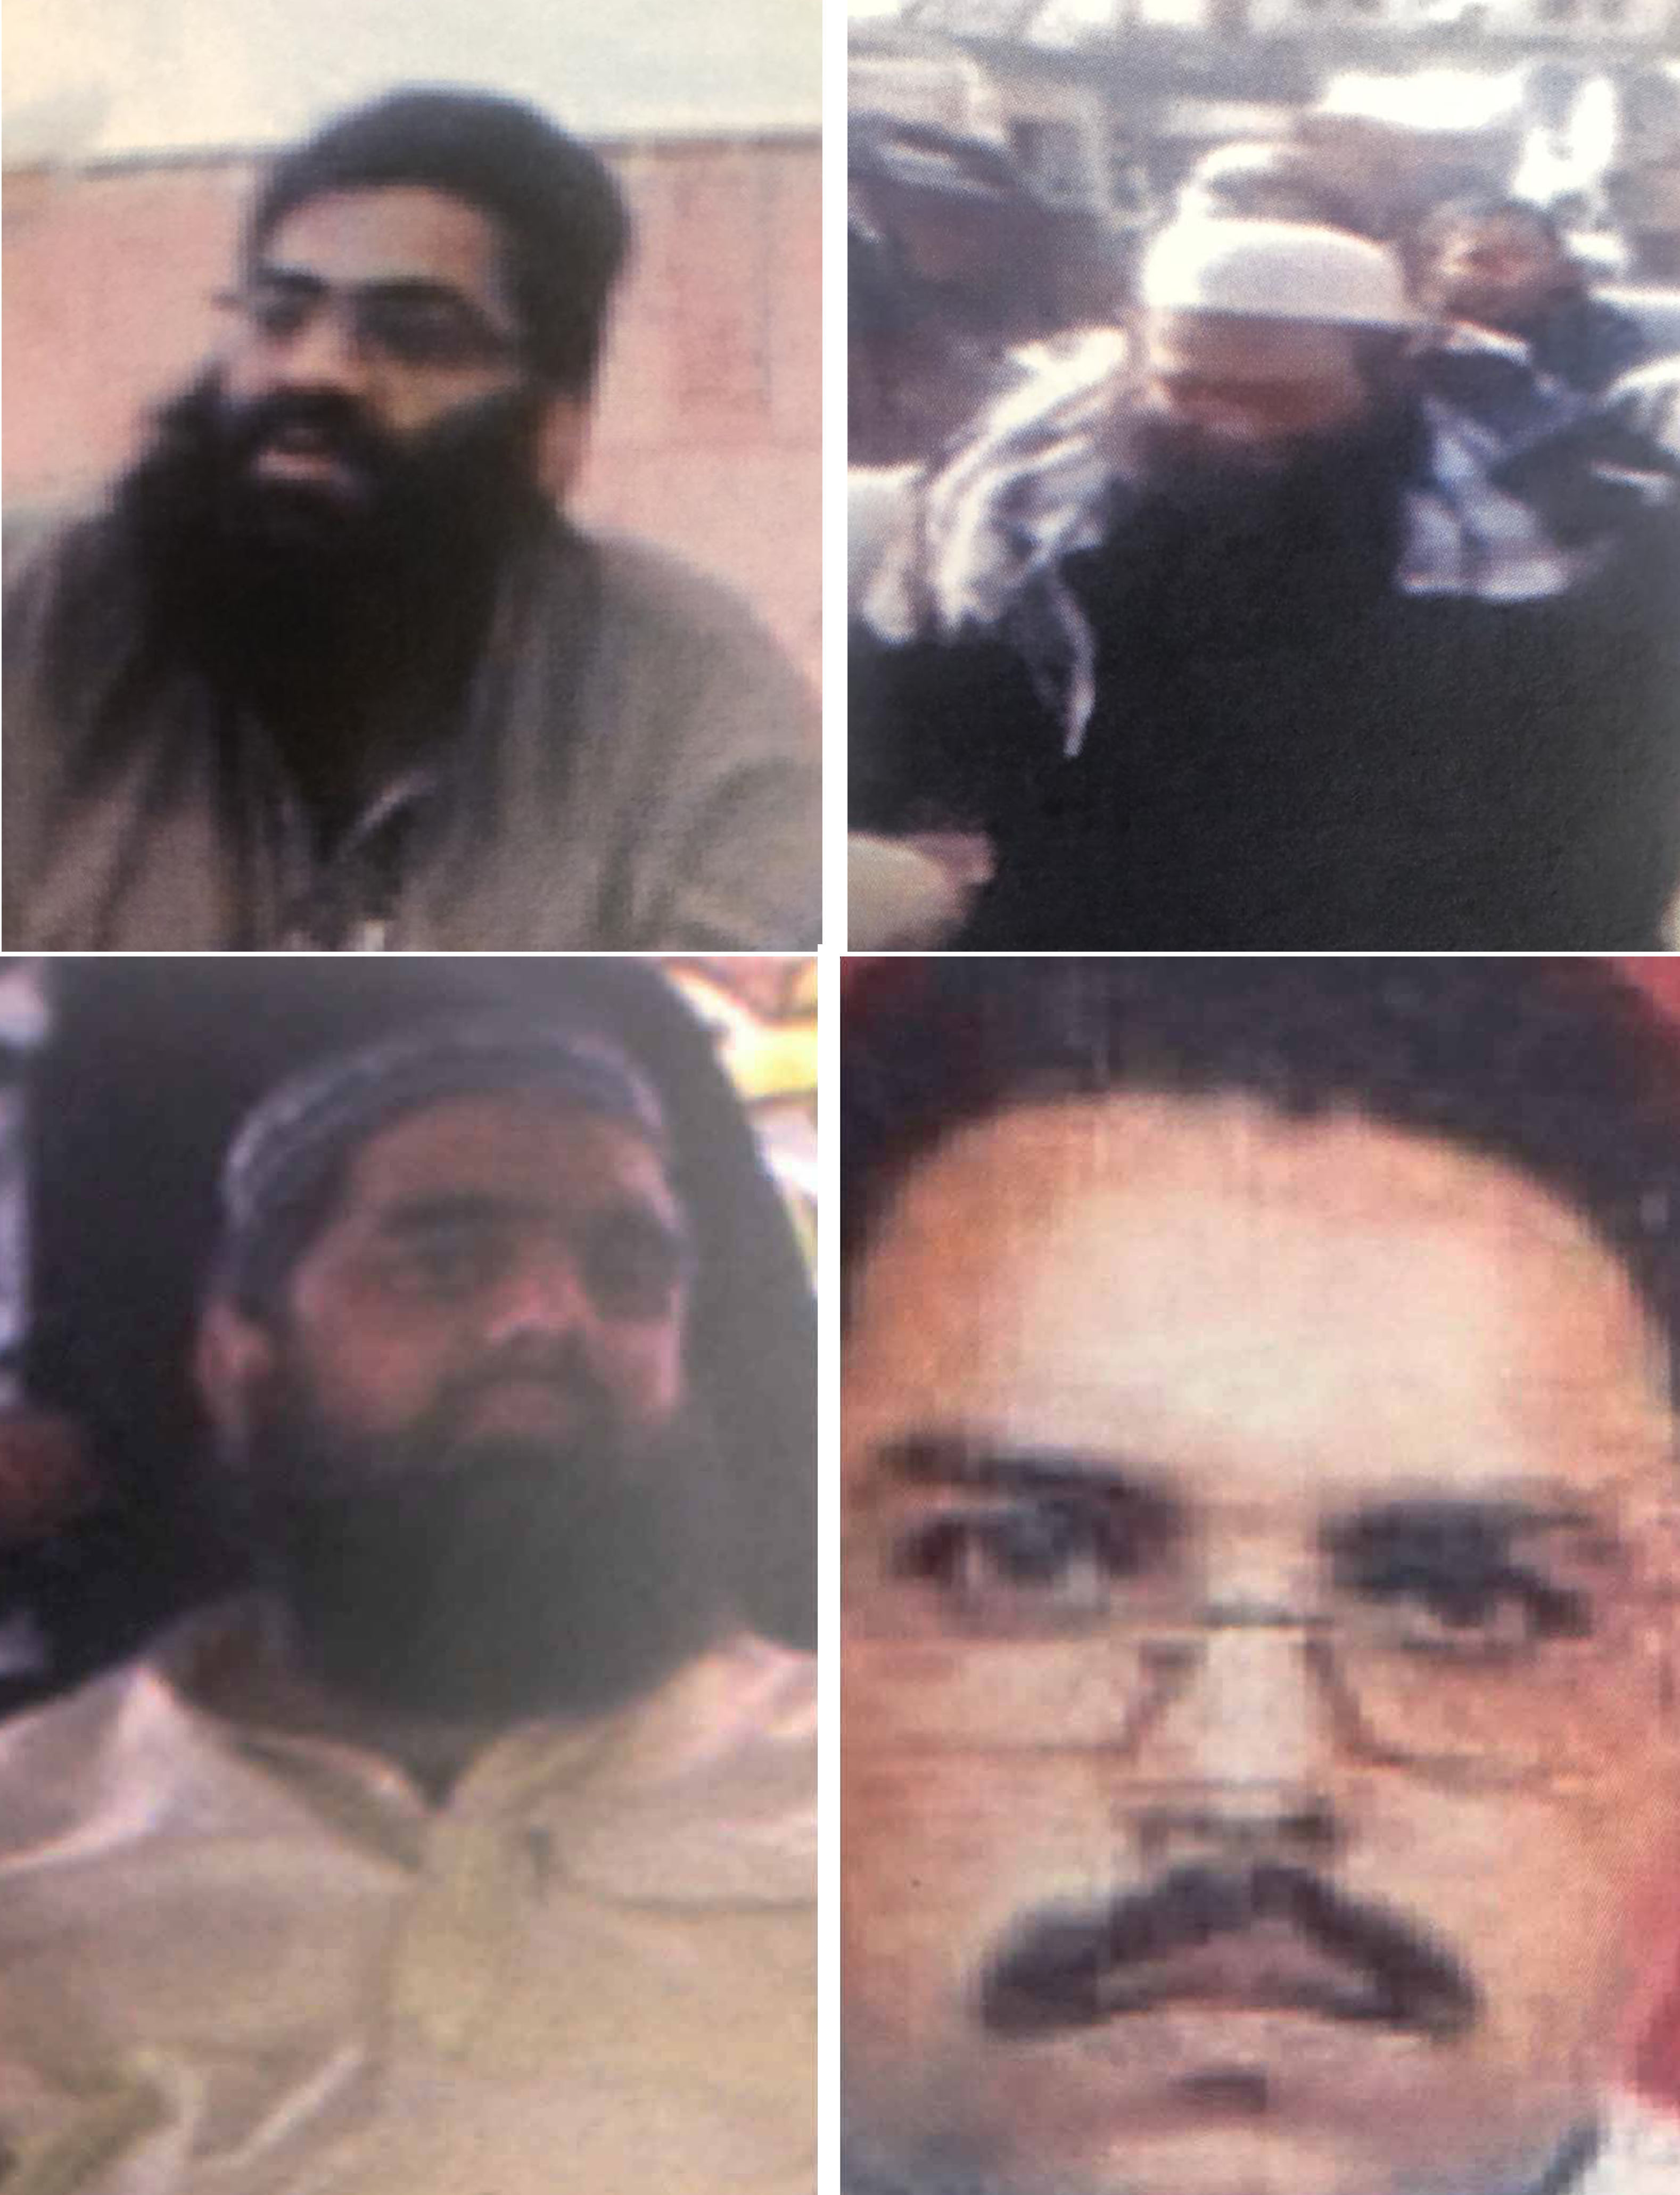 12 JuD and JeM members sentenced by anti-terror courts in Pak